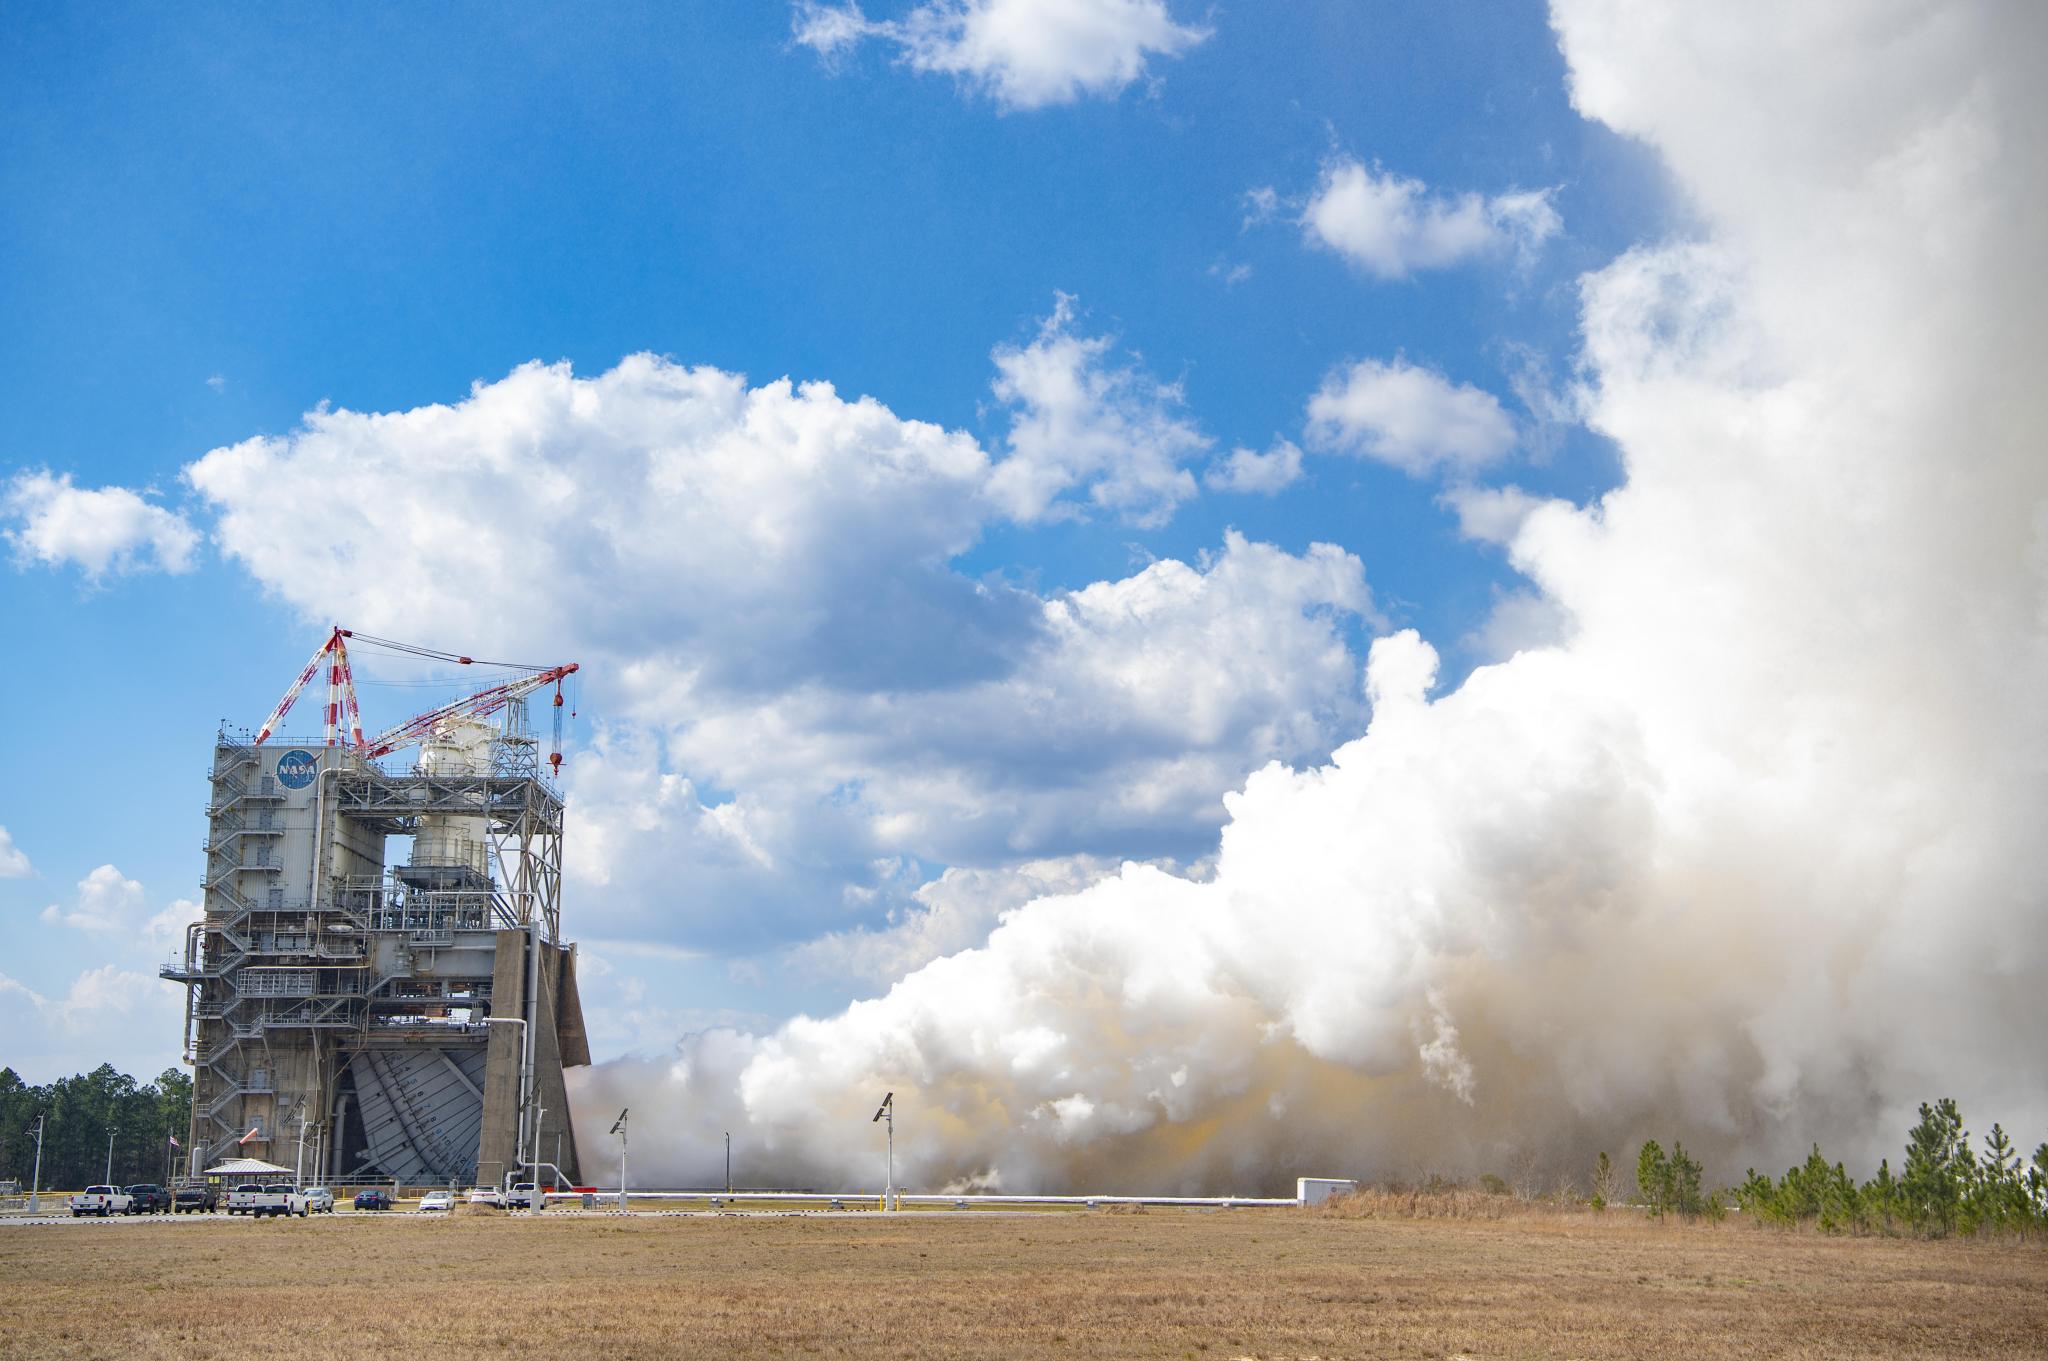 vapor clouds erupt from a RS-25 hot fire; view is from across a grassy field